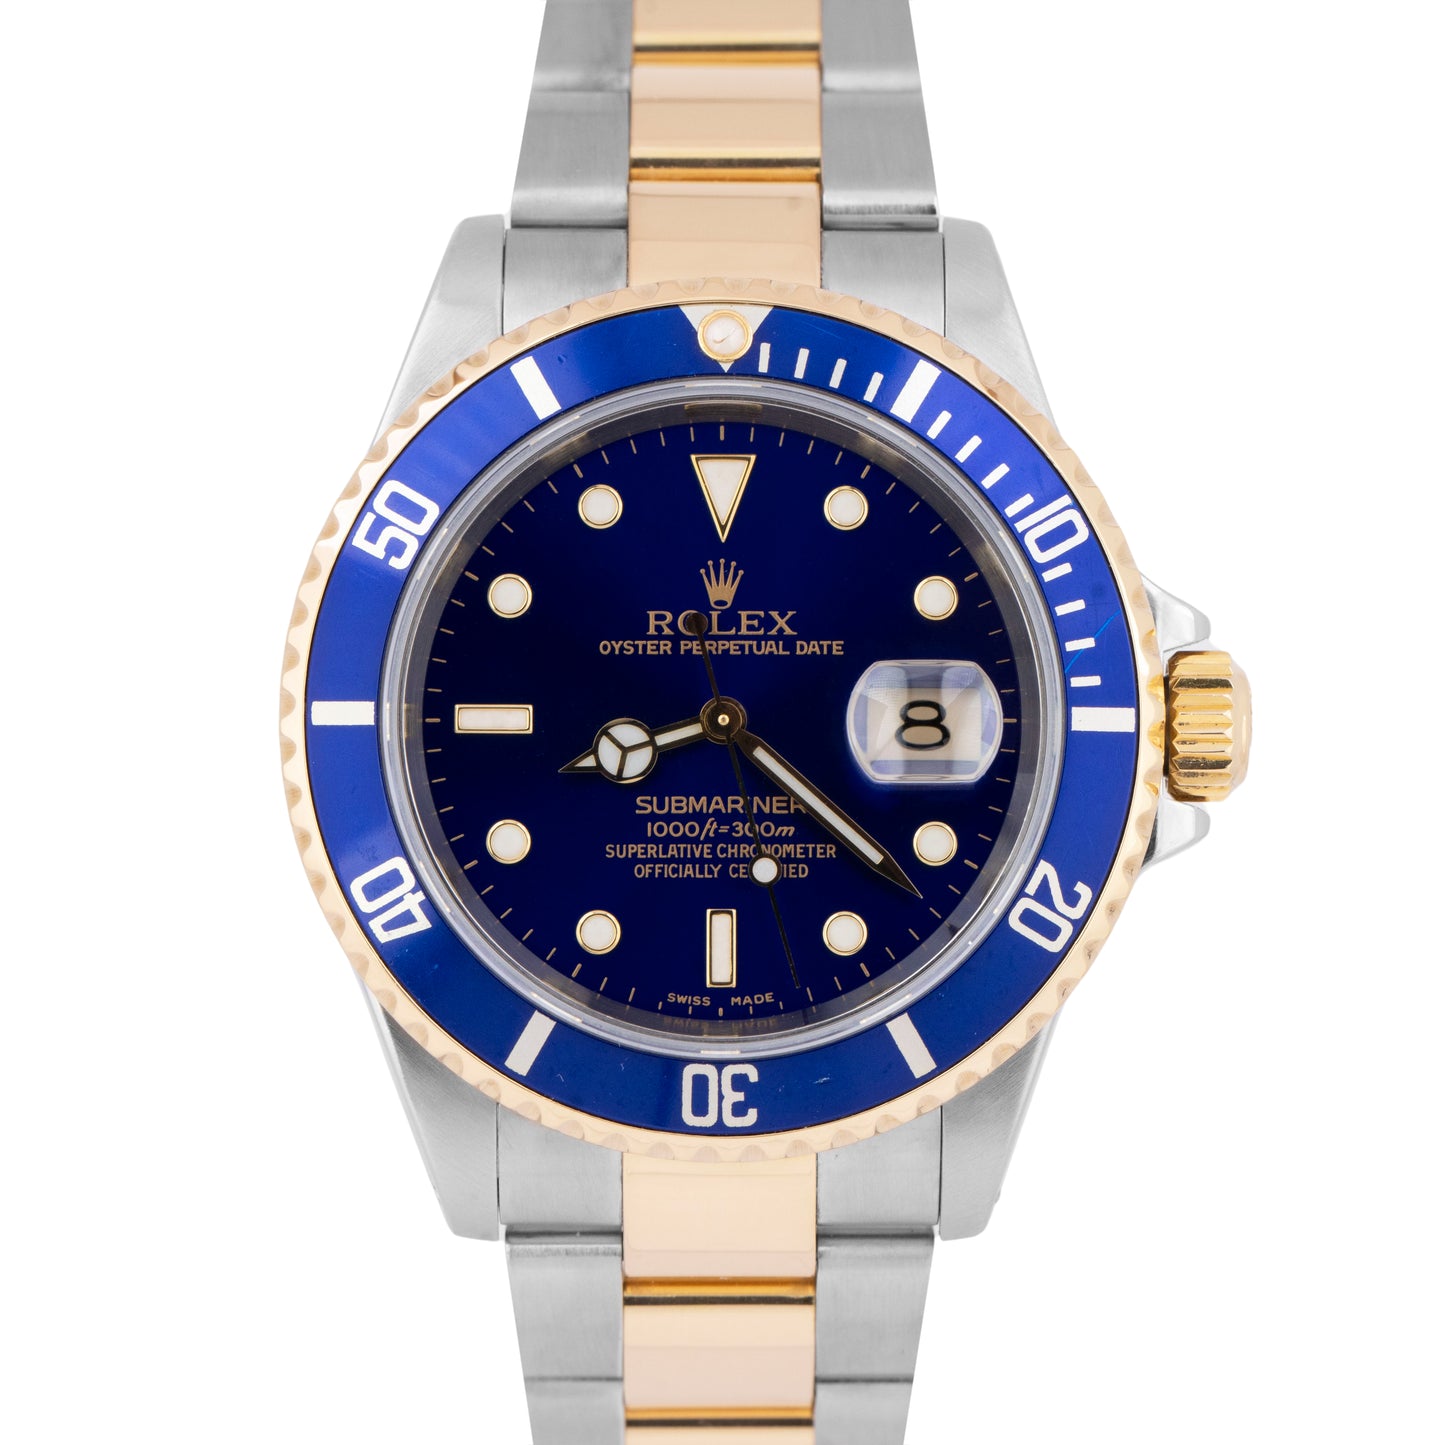 PAPERS Rolex Submariner Date 40mm Blue Two-Tone Gold Buckle Watch 16613 LB B+P